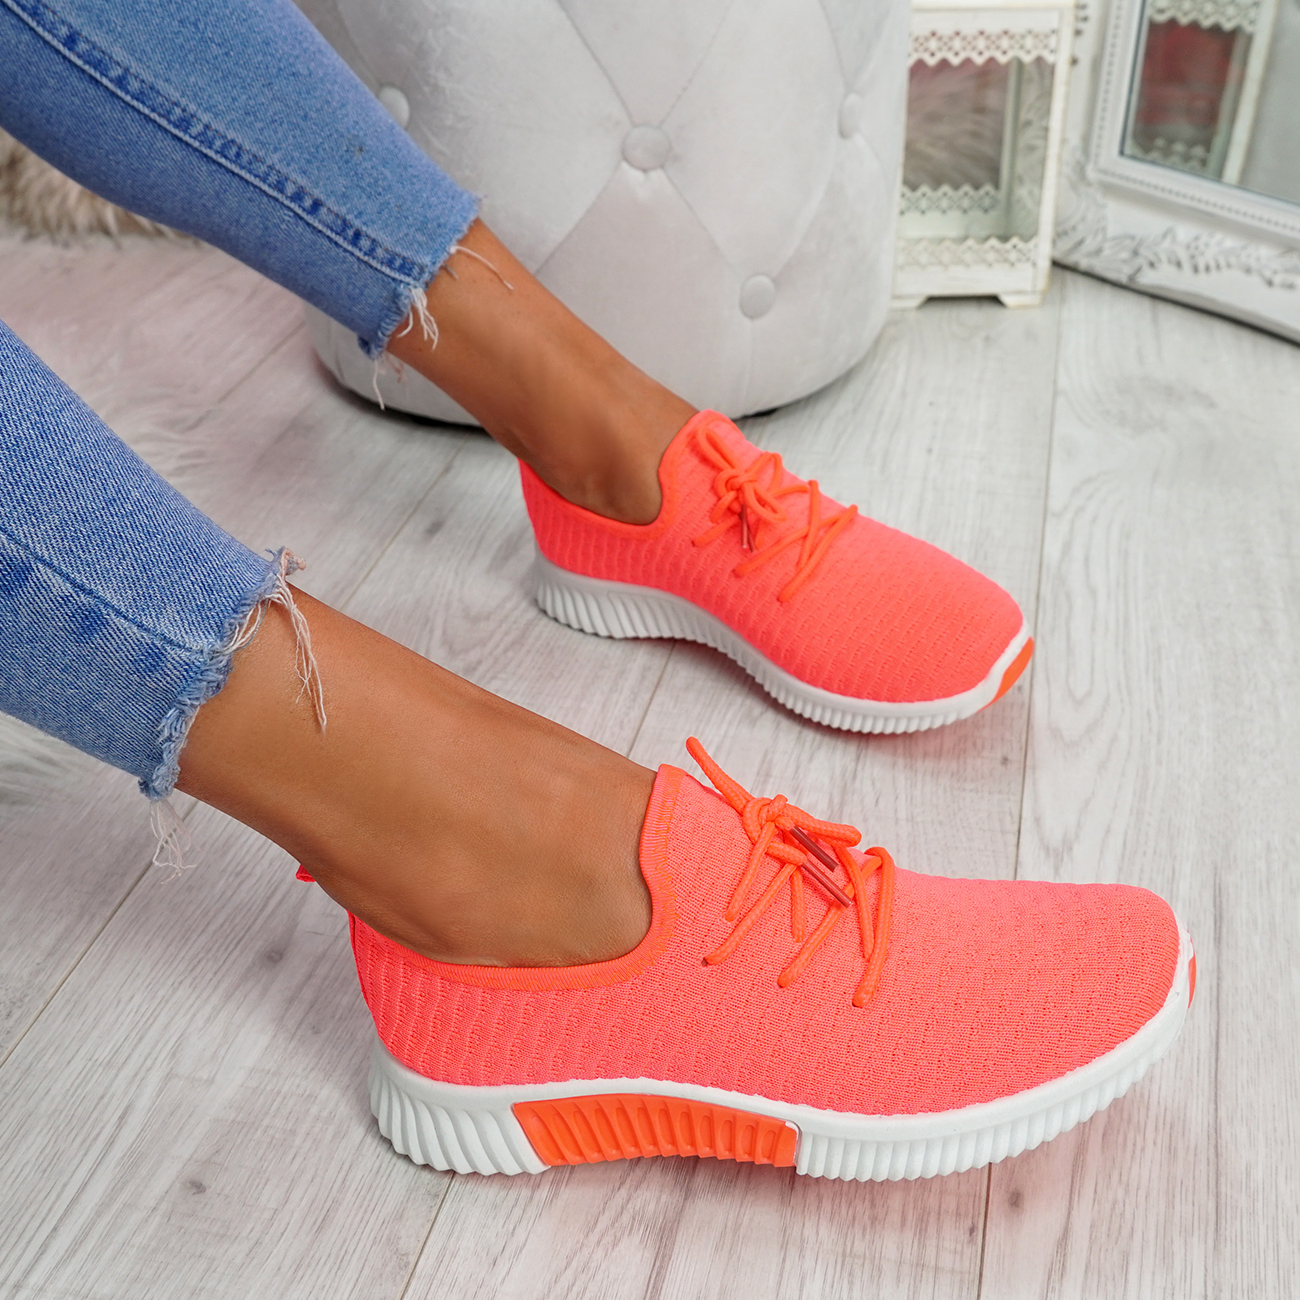 WOMENS LADIES LACE UP KNIT SPORTS GYM TRAINERS WOMEN SNEAKERS RUNNING ...